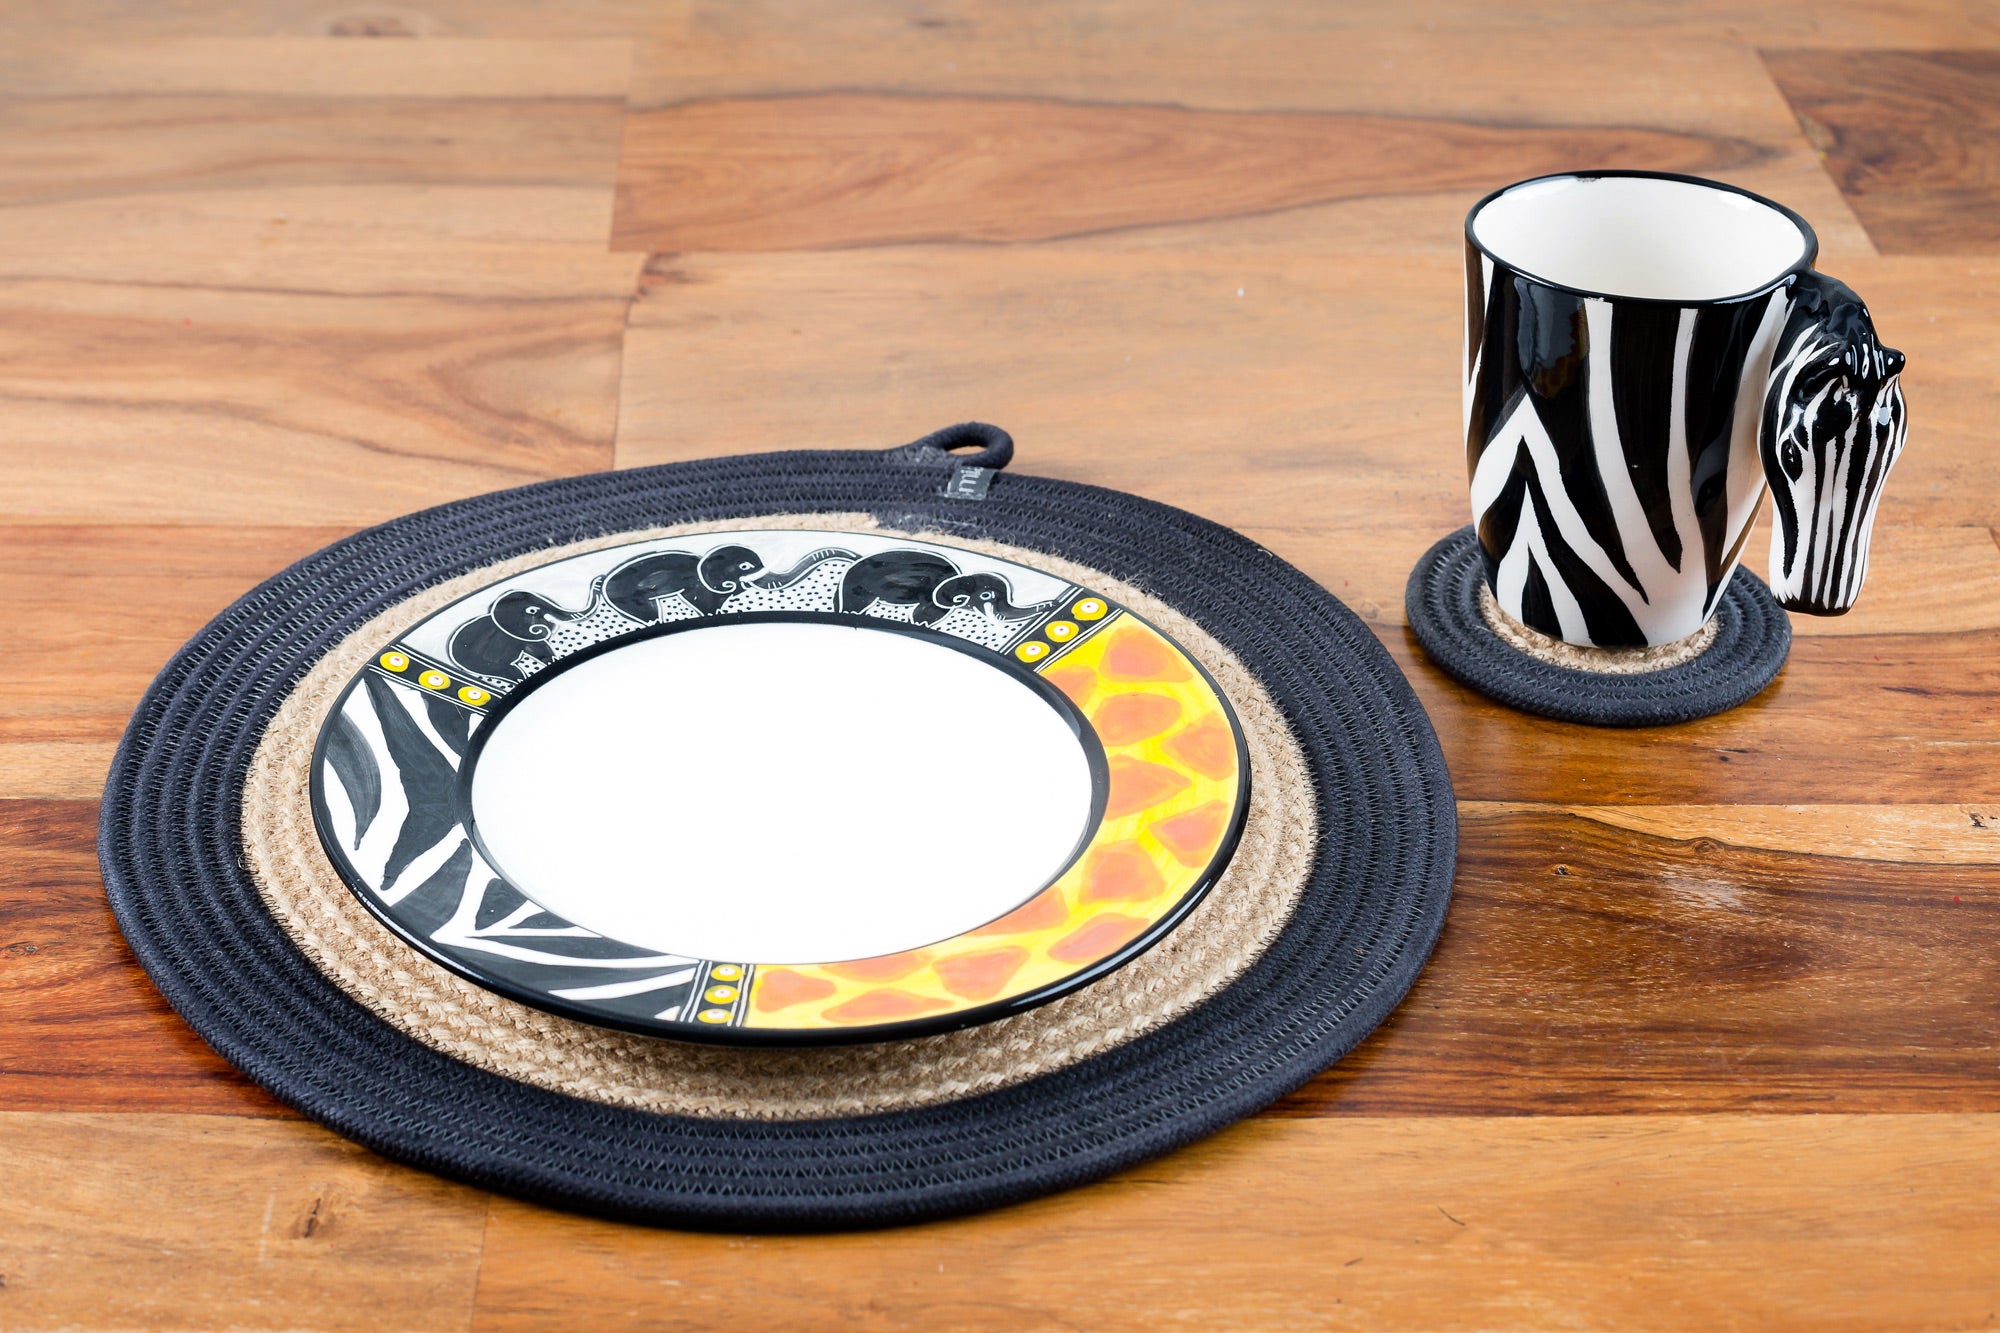 Ceramic Zebra coffee mug. White mug painted in zebra print with a zebra head for the handle! White inside.  Along side the African Animal print plate. Both on woven mats on a table.  Very cute pair as the zebra print is on both the mug & the plate.